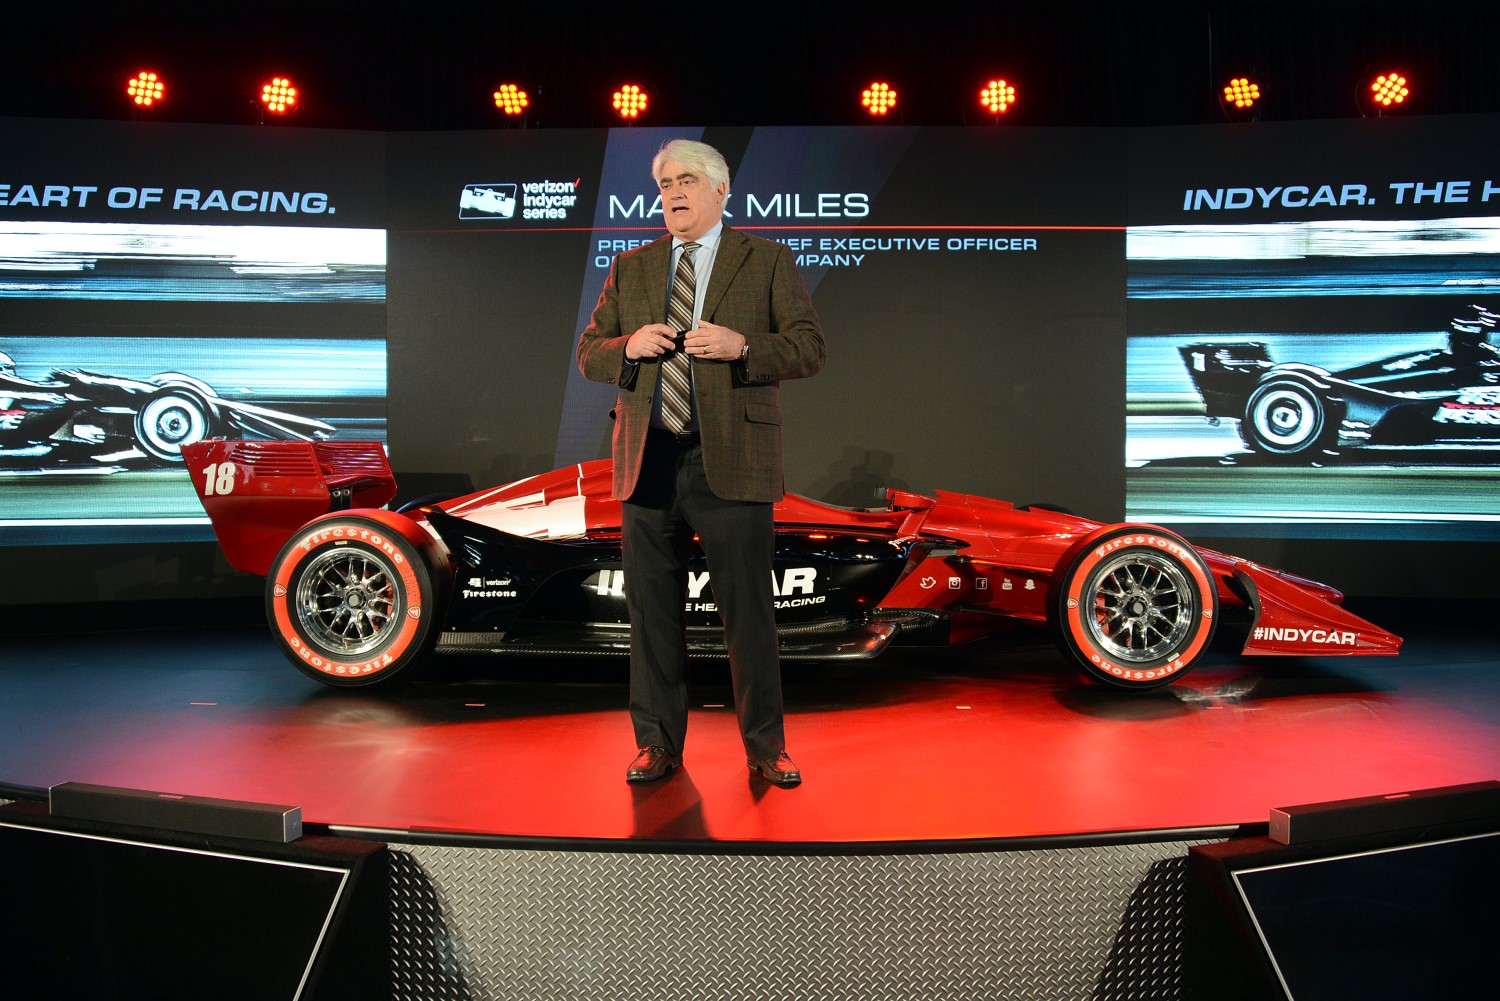 Mark Miles thinks a better looking car will attract new manufacturers. Psst, someone please tell him manufacturers are not coming until IndyCar gets a minimum of 1 million TV viewers per race